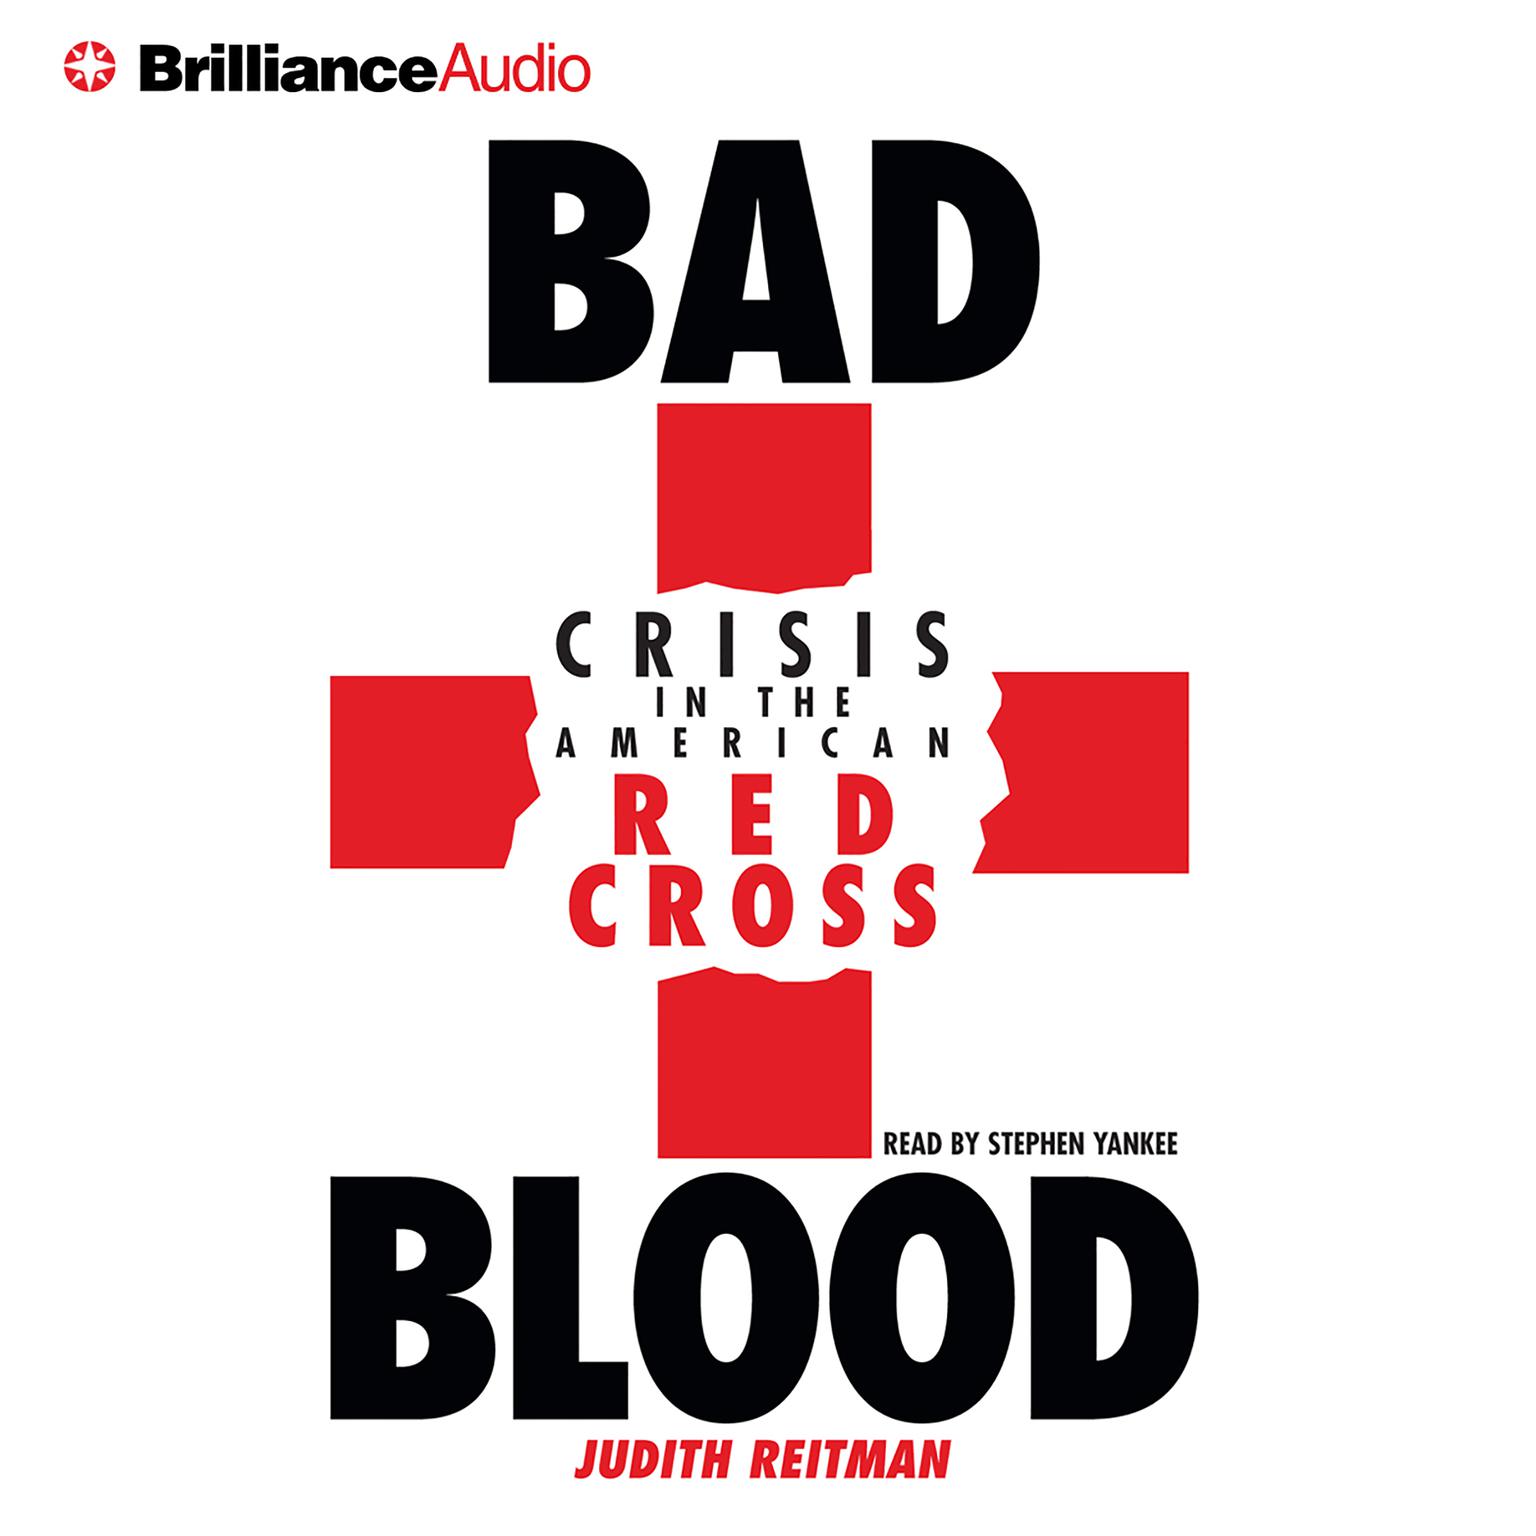 Bad Blood (Abridged): Crisis in the American Red Cross Audiobook, by Judith Reitman